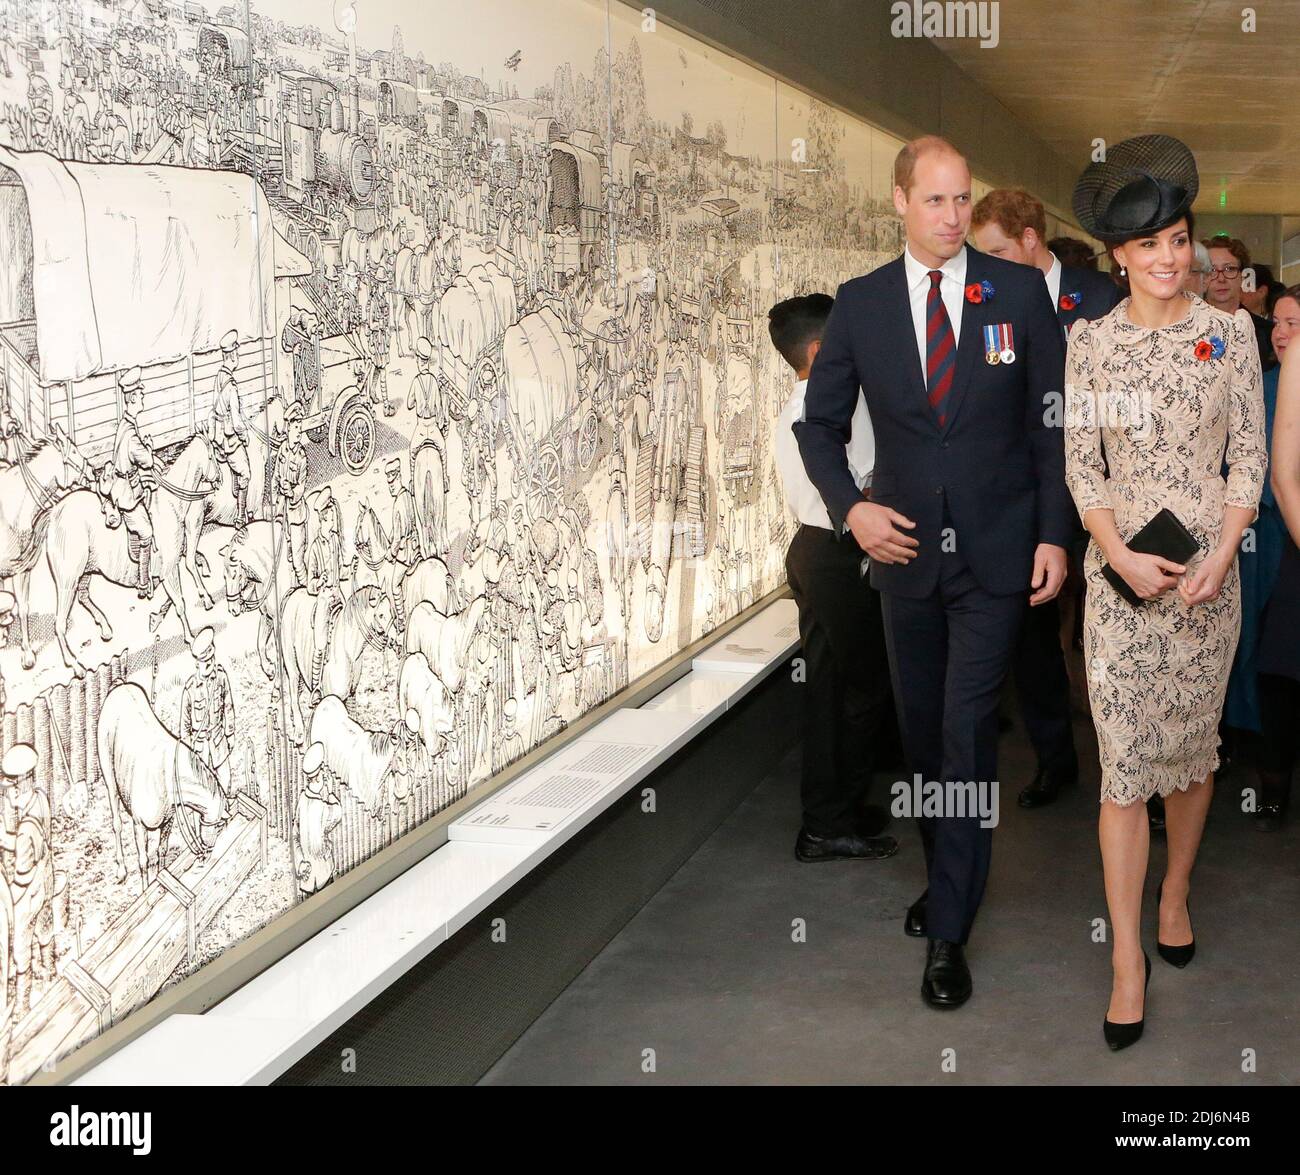 Britain's Prince William, the Duke of Cambridge, and his wife Kate, the Duchess of Cambridge, visit a museum inside the World War I Thiepval Monument prior to the Somme centenary commemorations in Thiepval, northern France, Friday, July 1st, 2016. One week after Britain's vote to leave the European Union, Prime Minister David Cameron and royal family members will stand side-by-side with France's President to celebrate their historic alliance at the centenary of the deadliest battle of World War I. Photo by Francois Mori/Pool/ABACAPRESS.COM Stock Photo